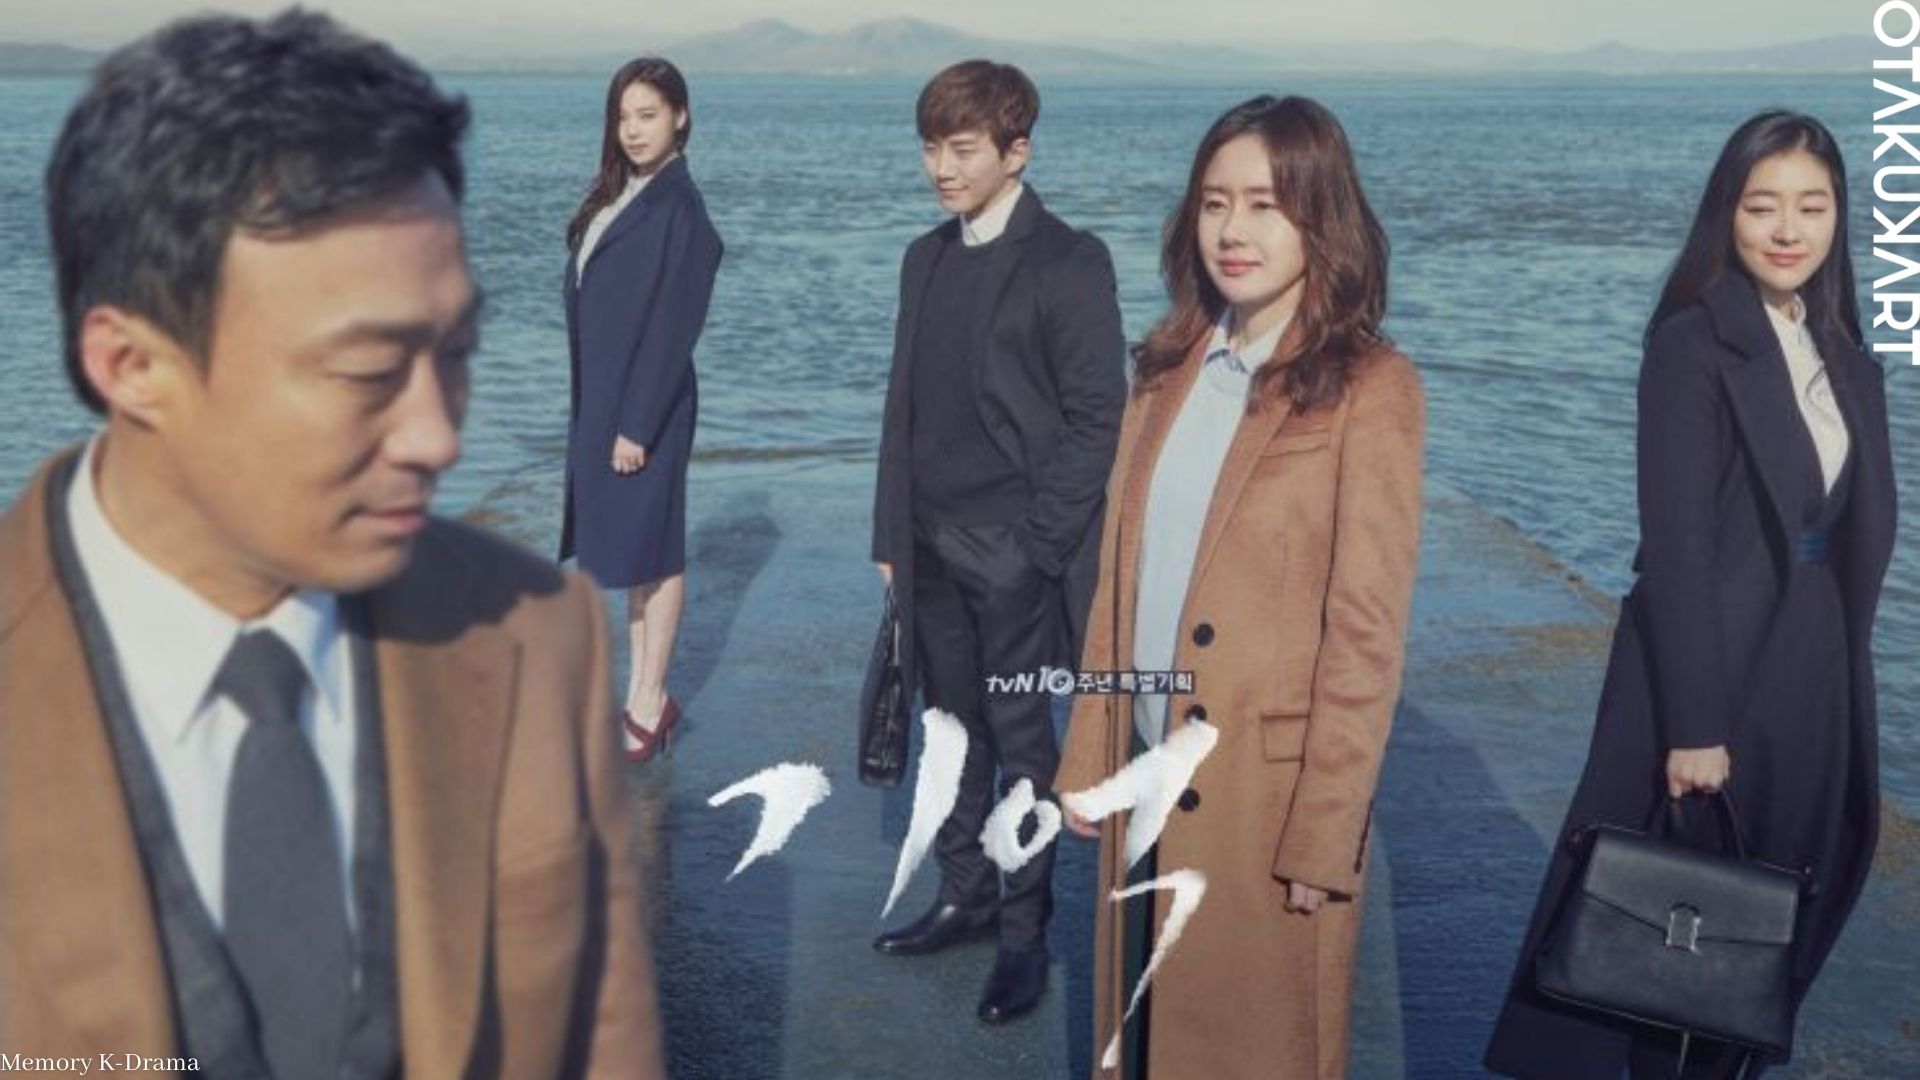 How To Watch Memory K-Drama? Know All the Details